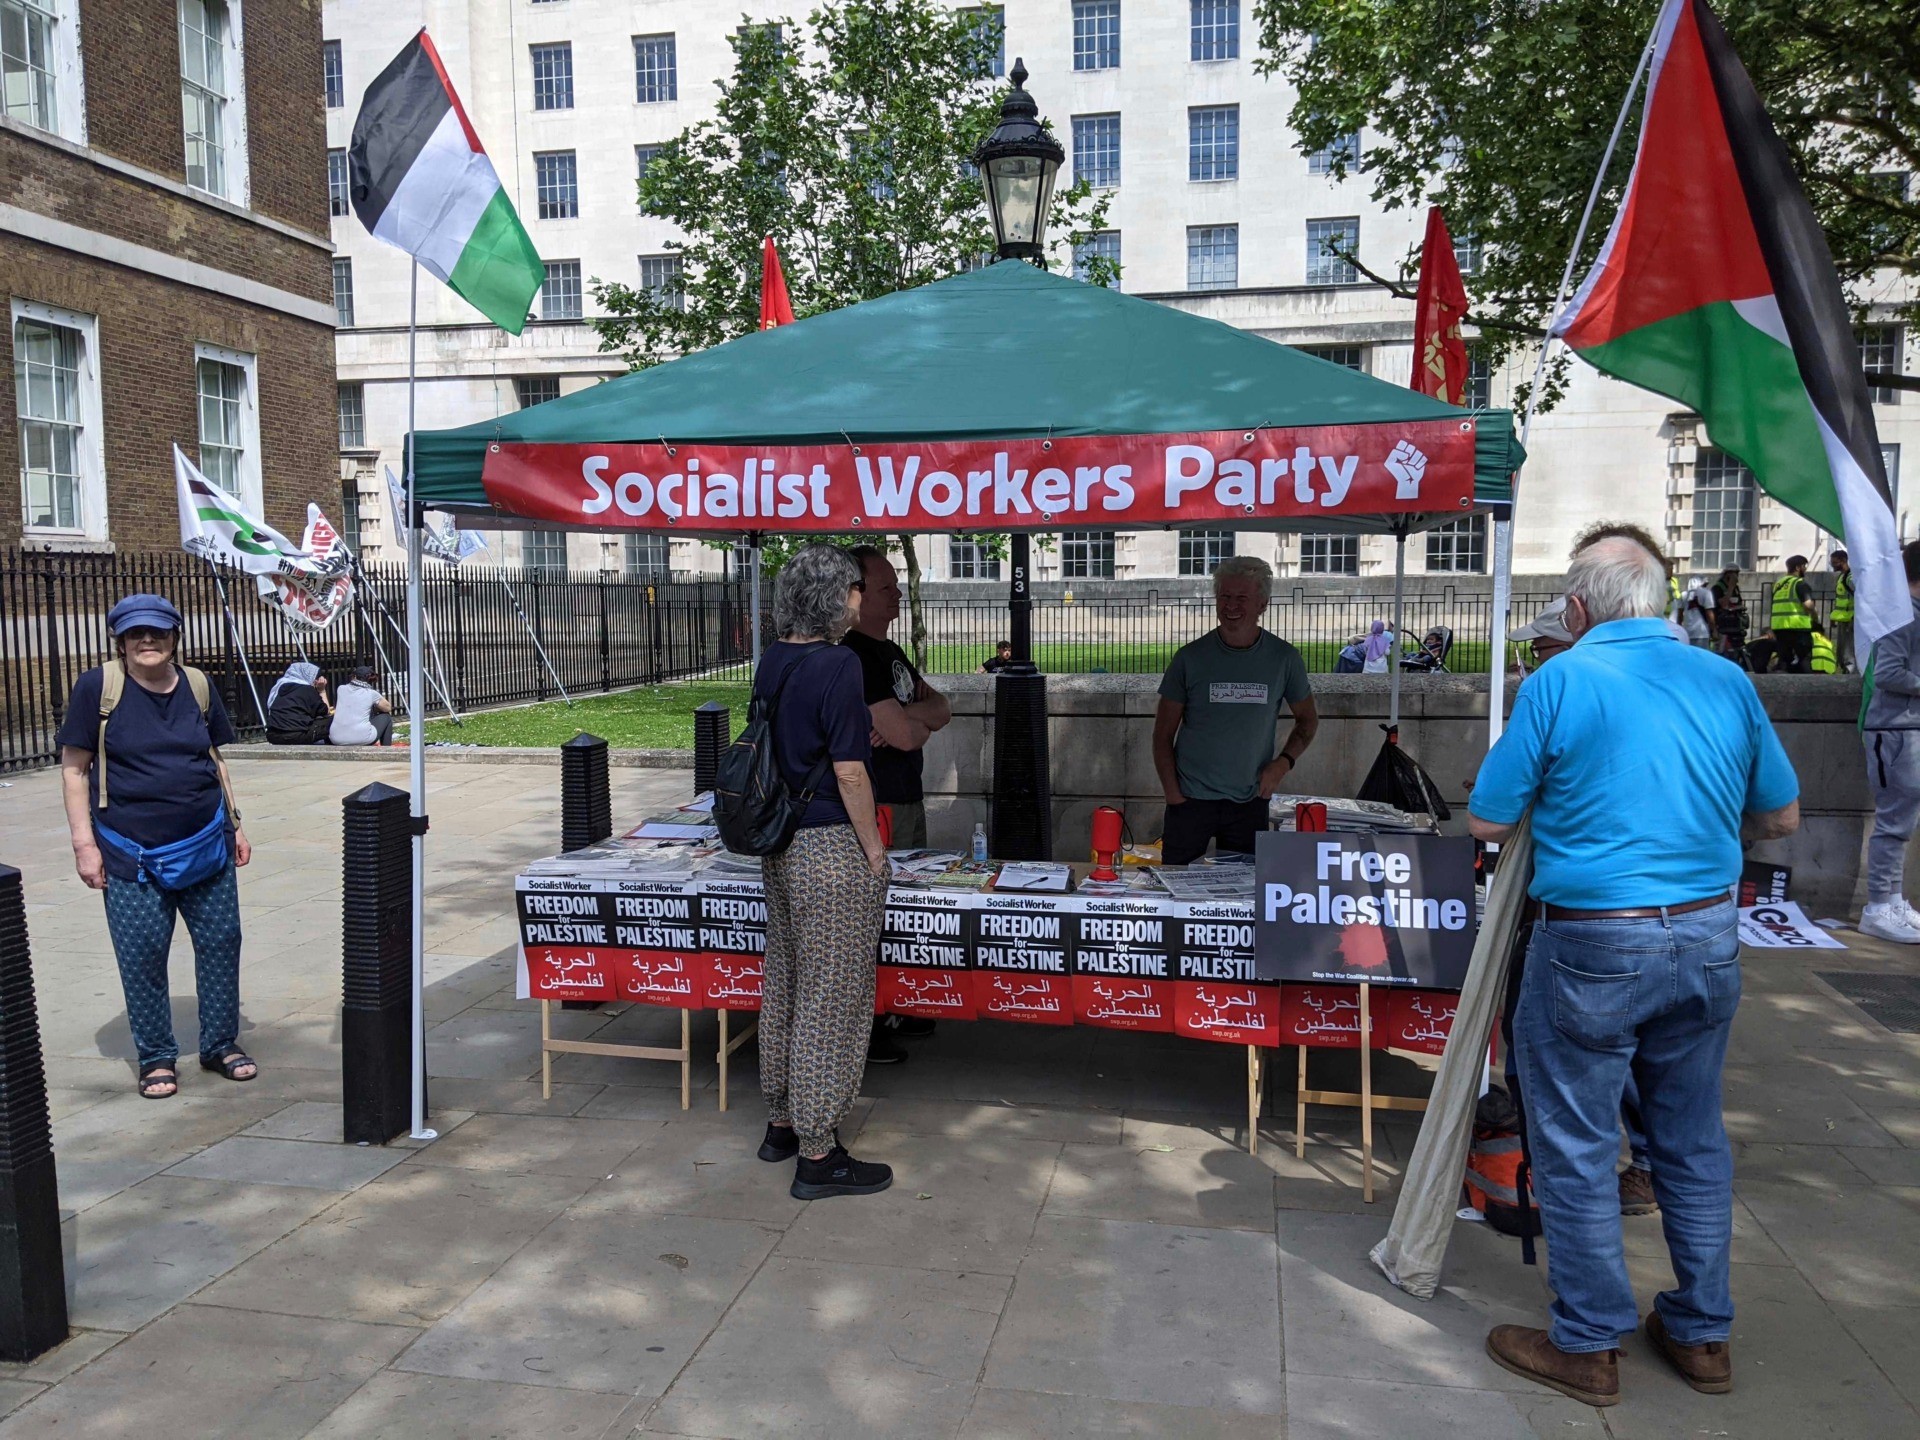 The Socialist Workers Party attended the Downing Street protest against Israel, handing out placards and propaganda. June 12th, 2021. Kurt Zindulka, Breitbart News